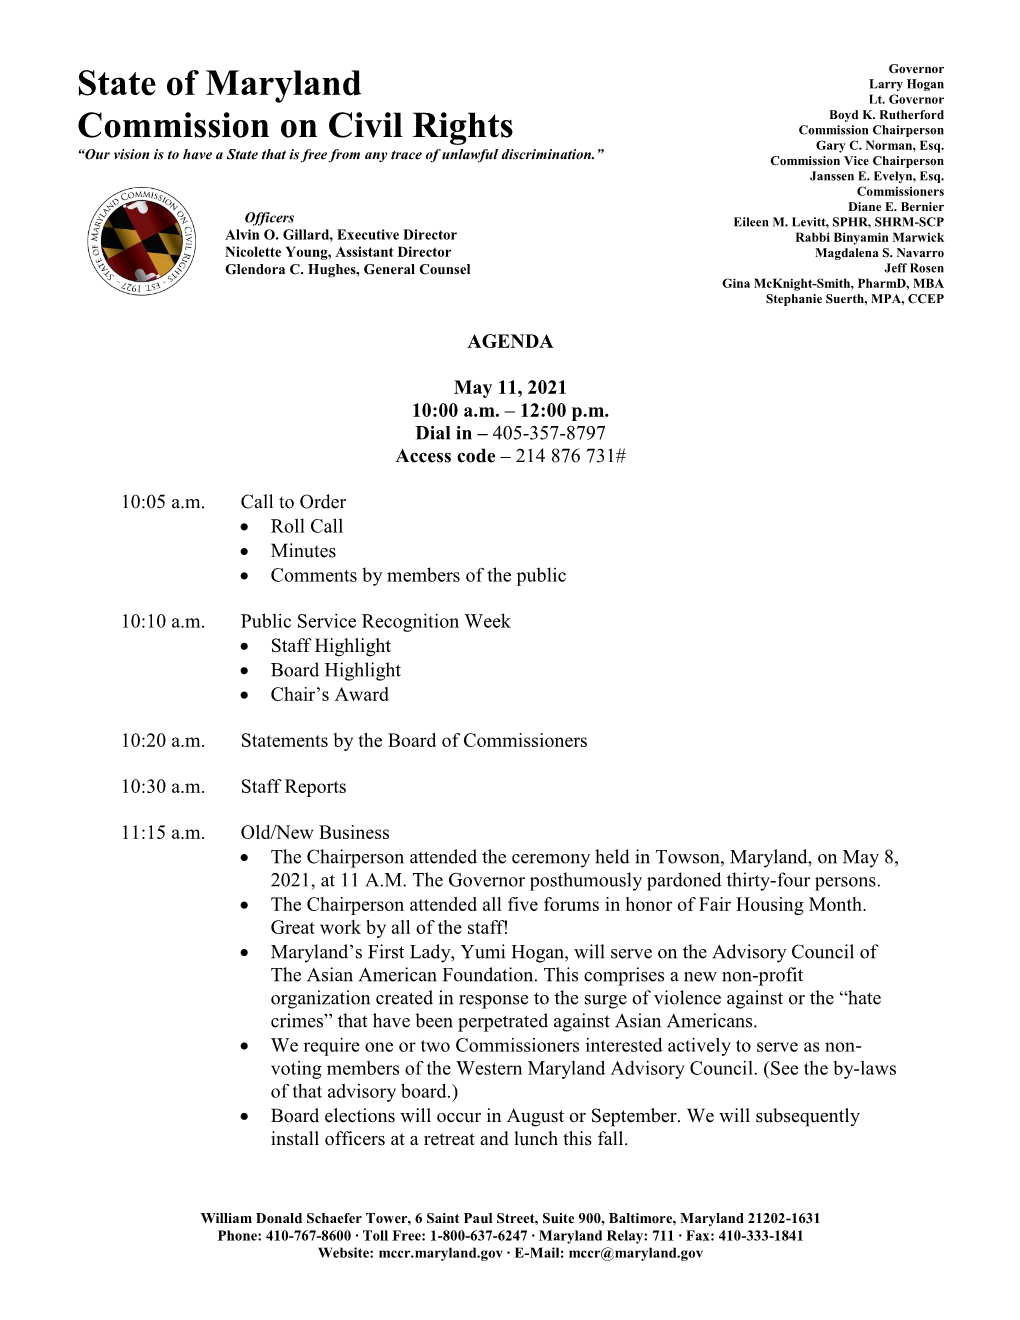 State of Maryland Commission on Civil Rights